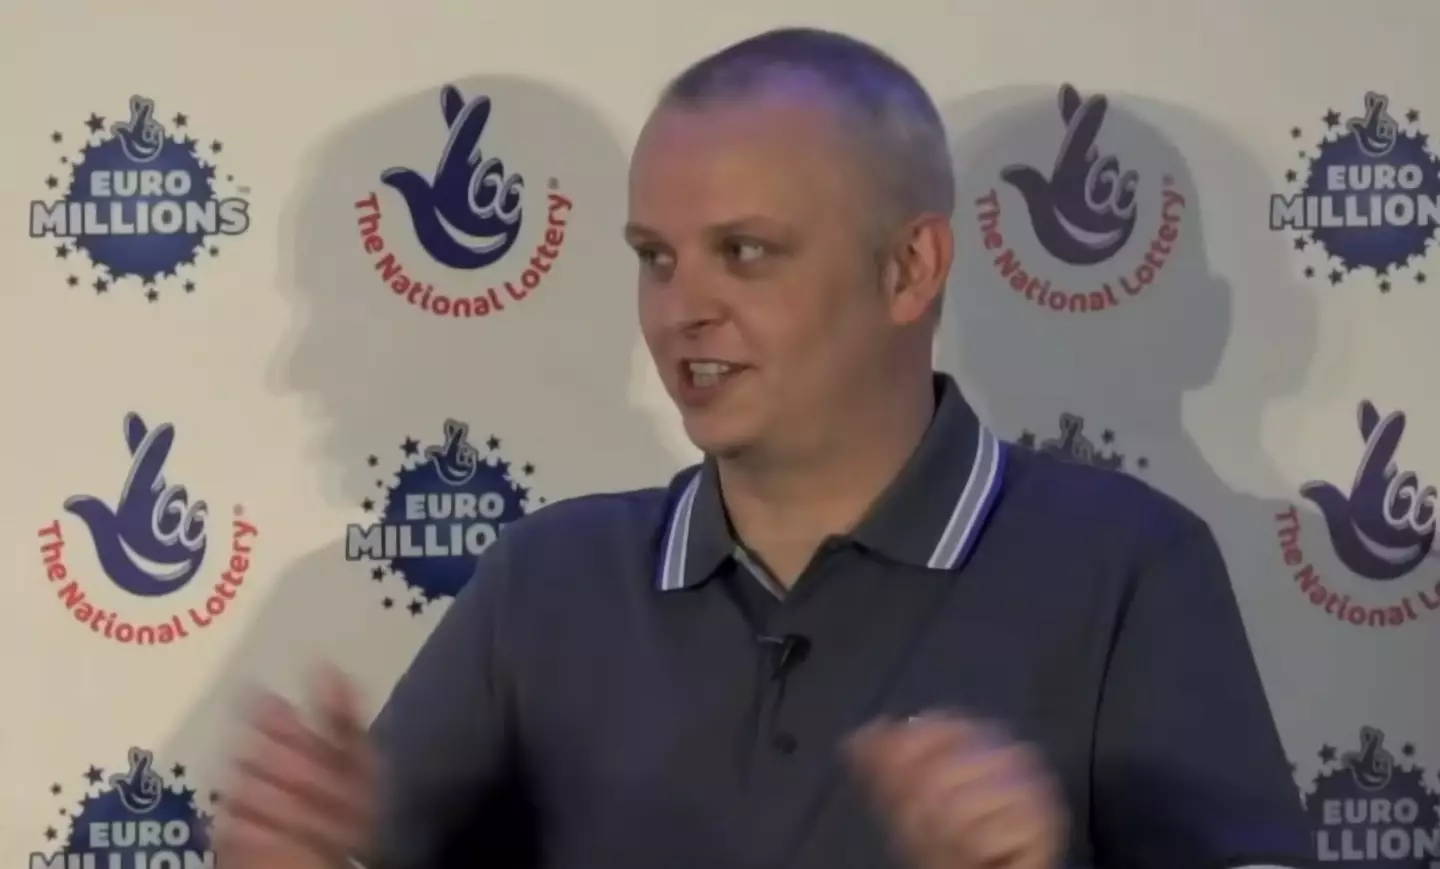 Neil Trotter won £108 million on the National Lottery back in 2014.